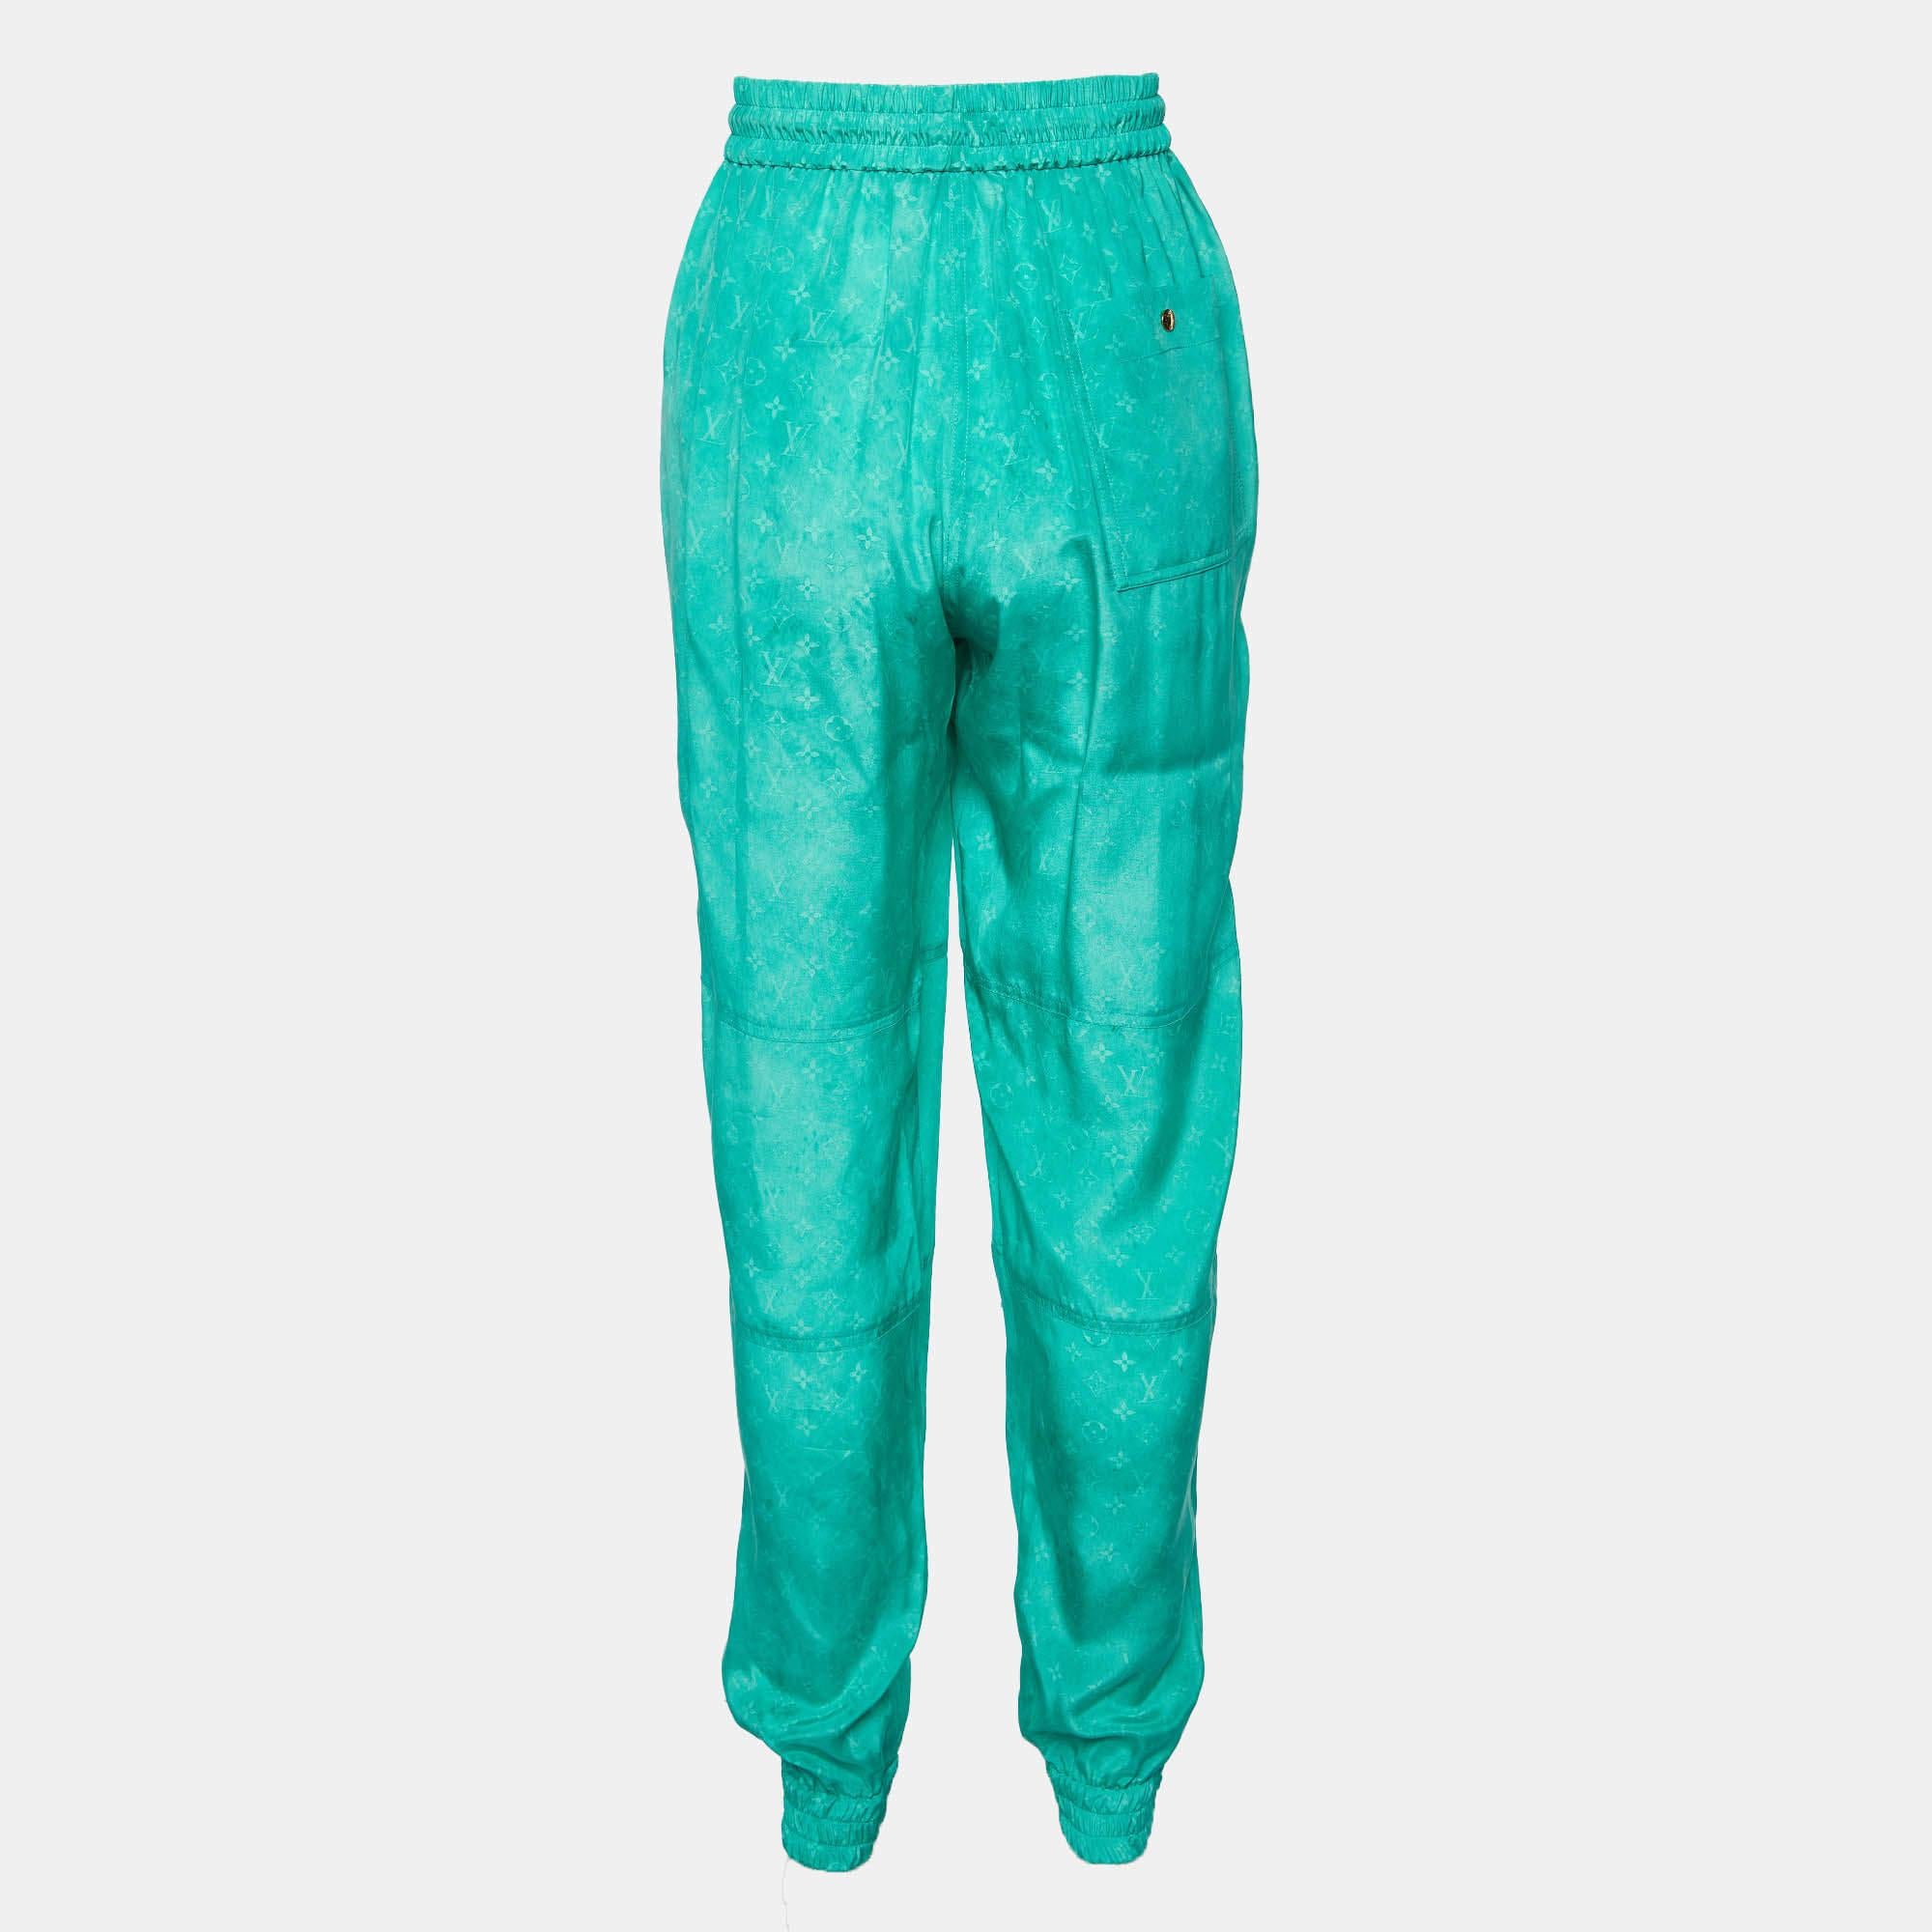 These luxurious trousers by Louis Vuitton are a wardrobe staple. Crafted from monogram silk, they come in a lovely shade of green. They are equipped with a drawstring waist and are cut to offer a relaxed fit. They are a perfect fit for casual days.

